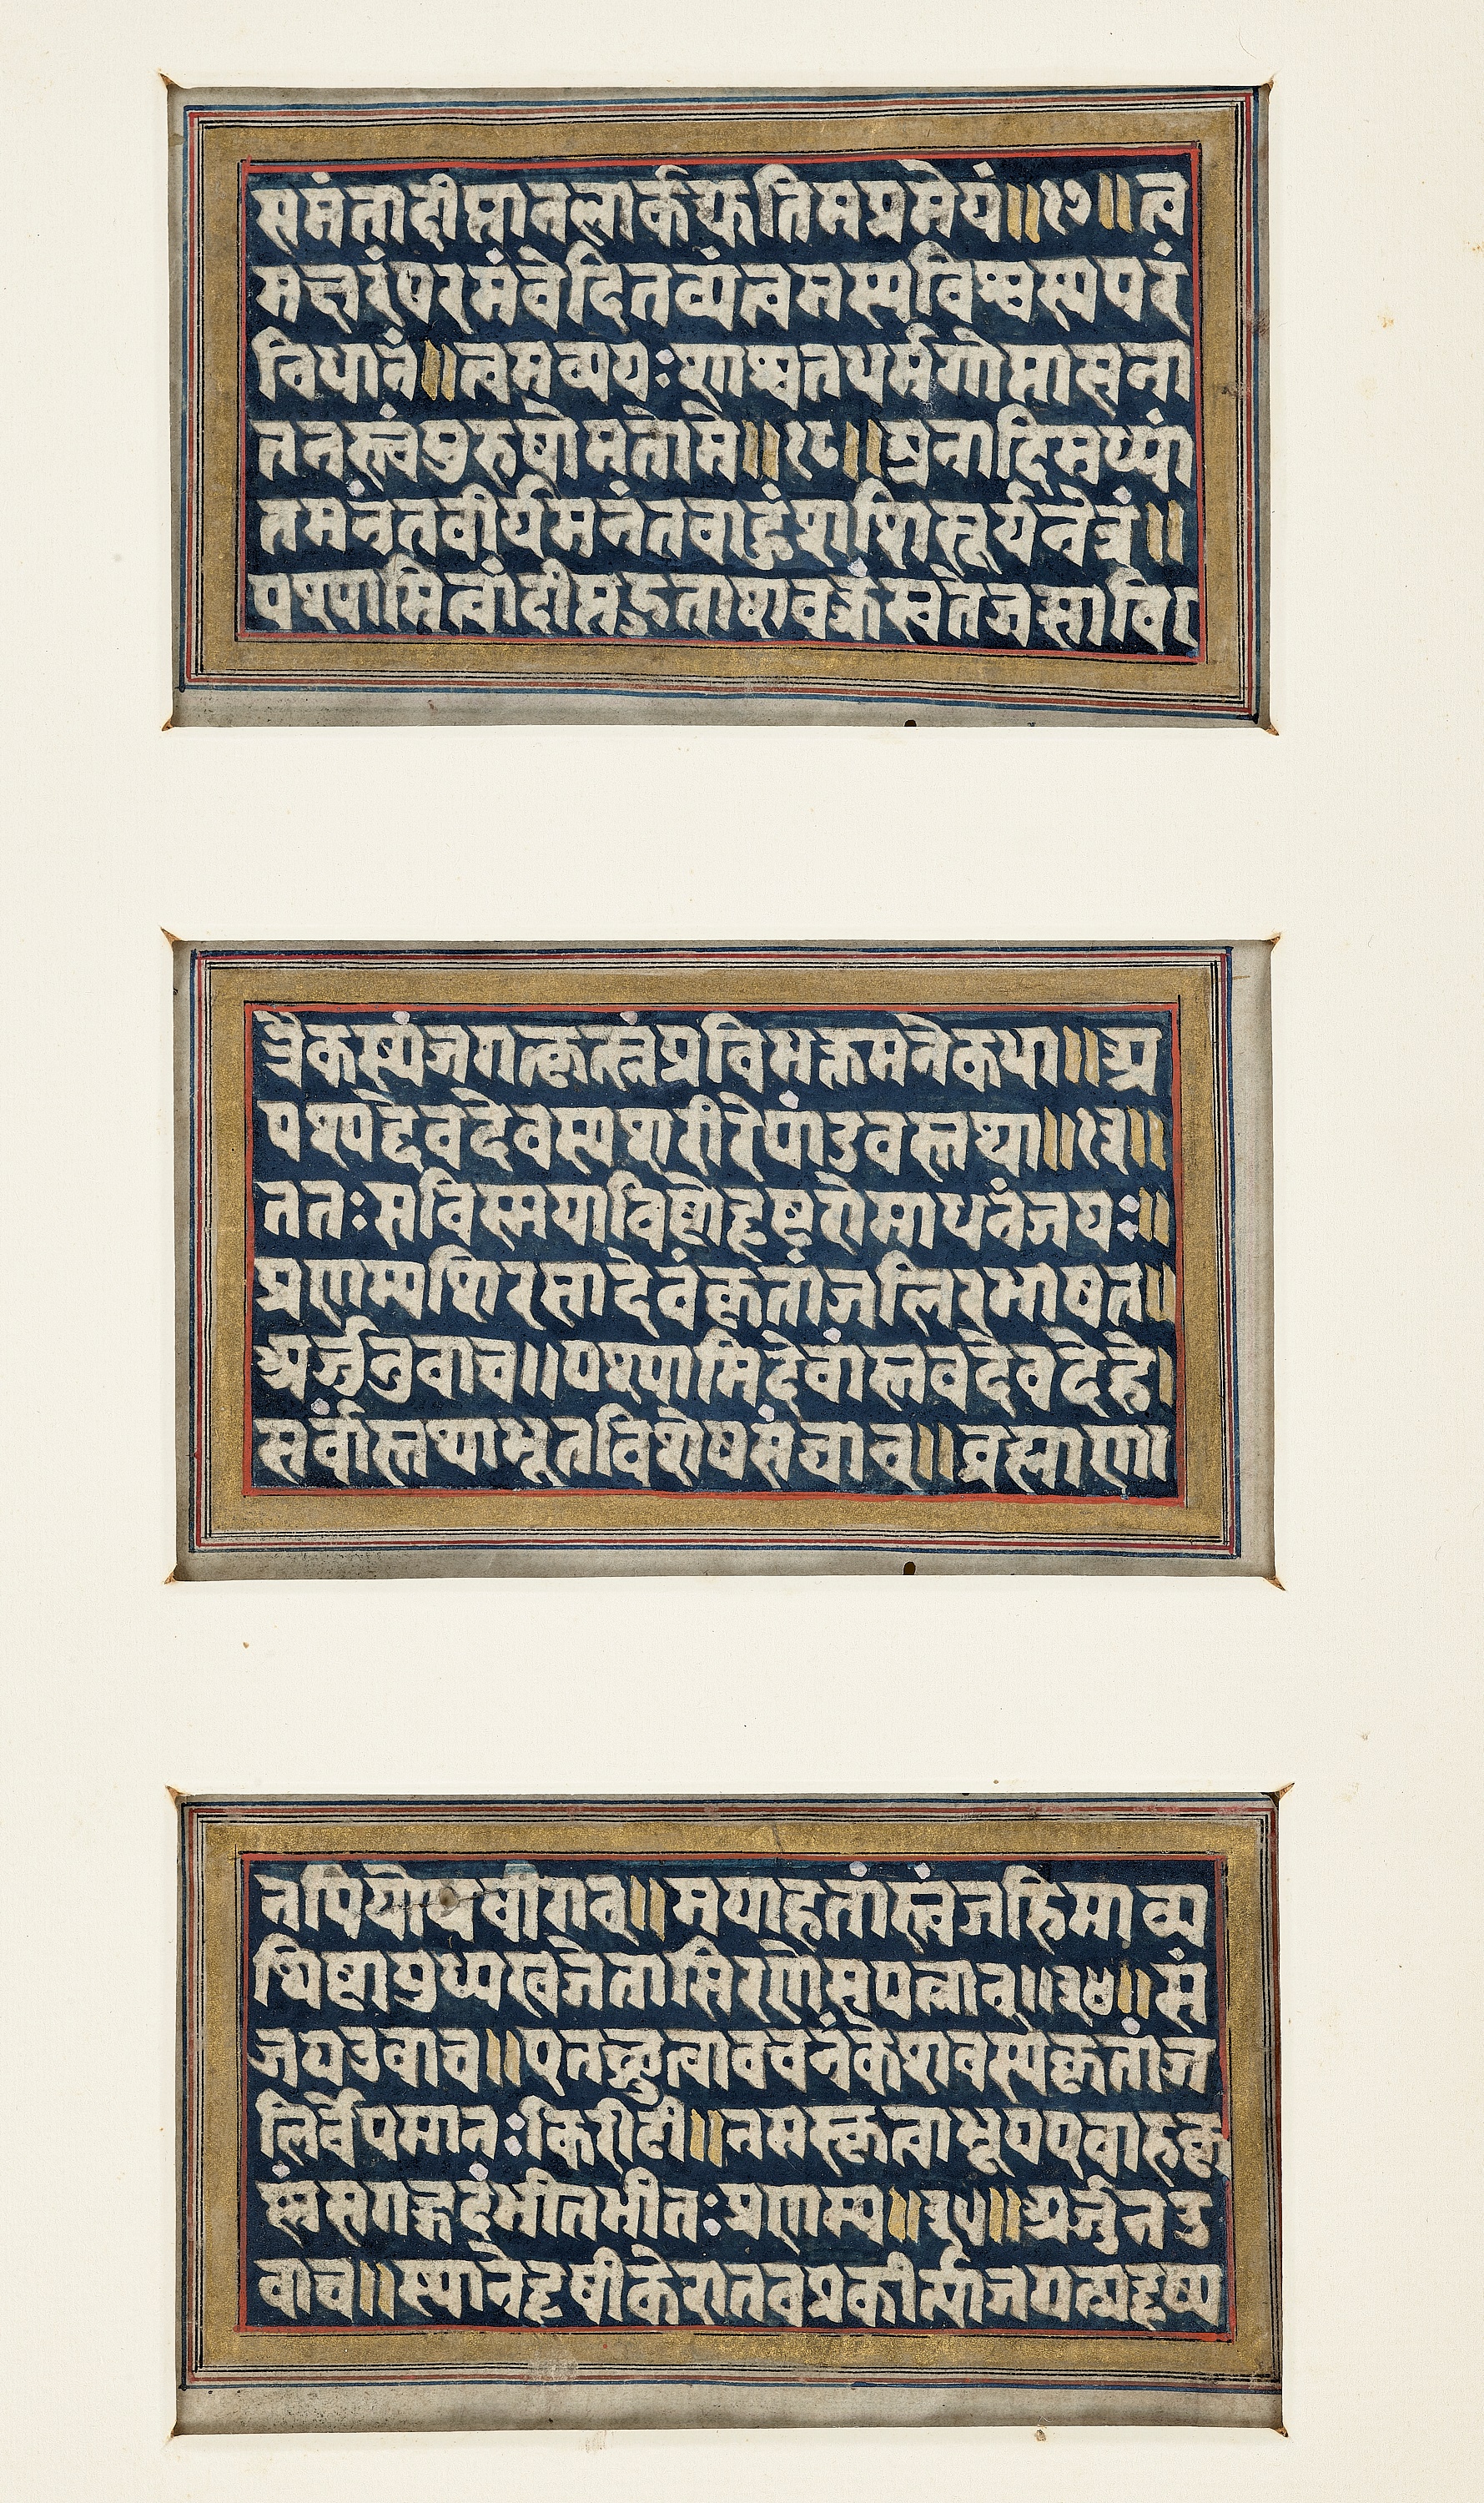 A RARE GROUP OF 27 FOLIOS FROM A MANUSCRIPT, KASHMIR 18TH CENTURY - Image 20 of 20